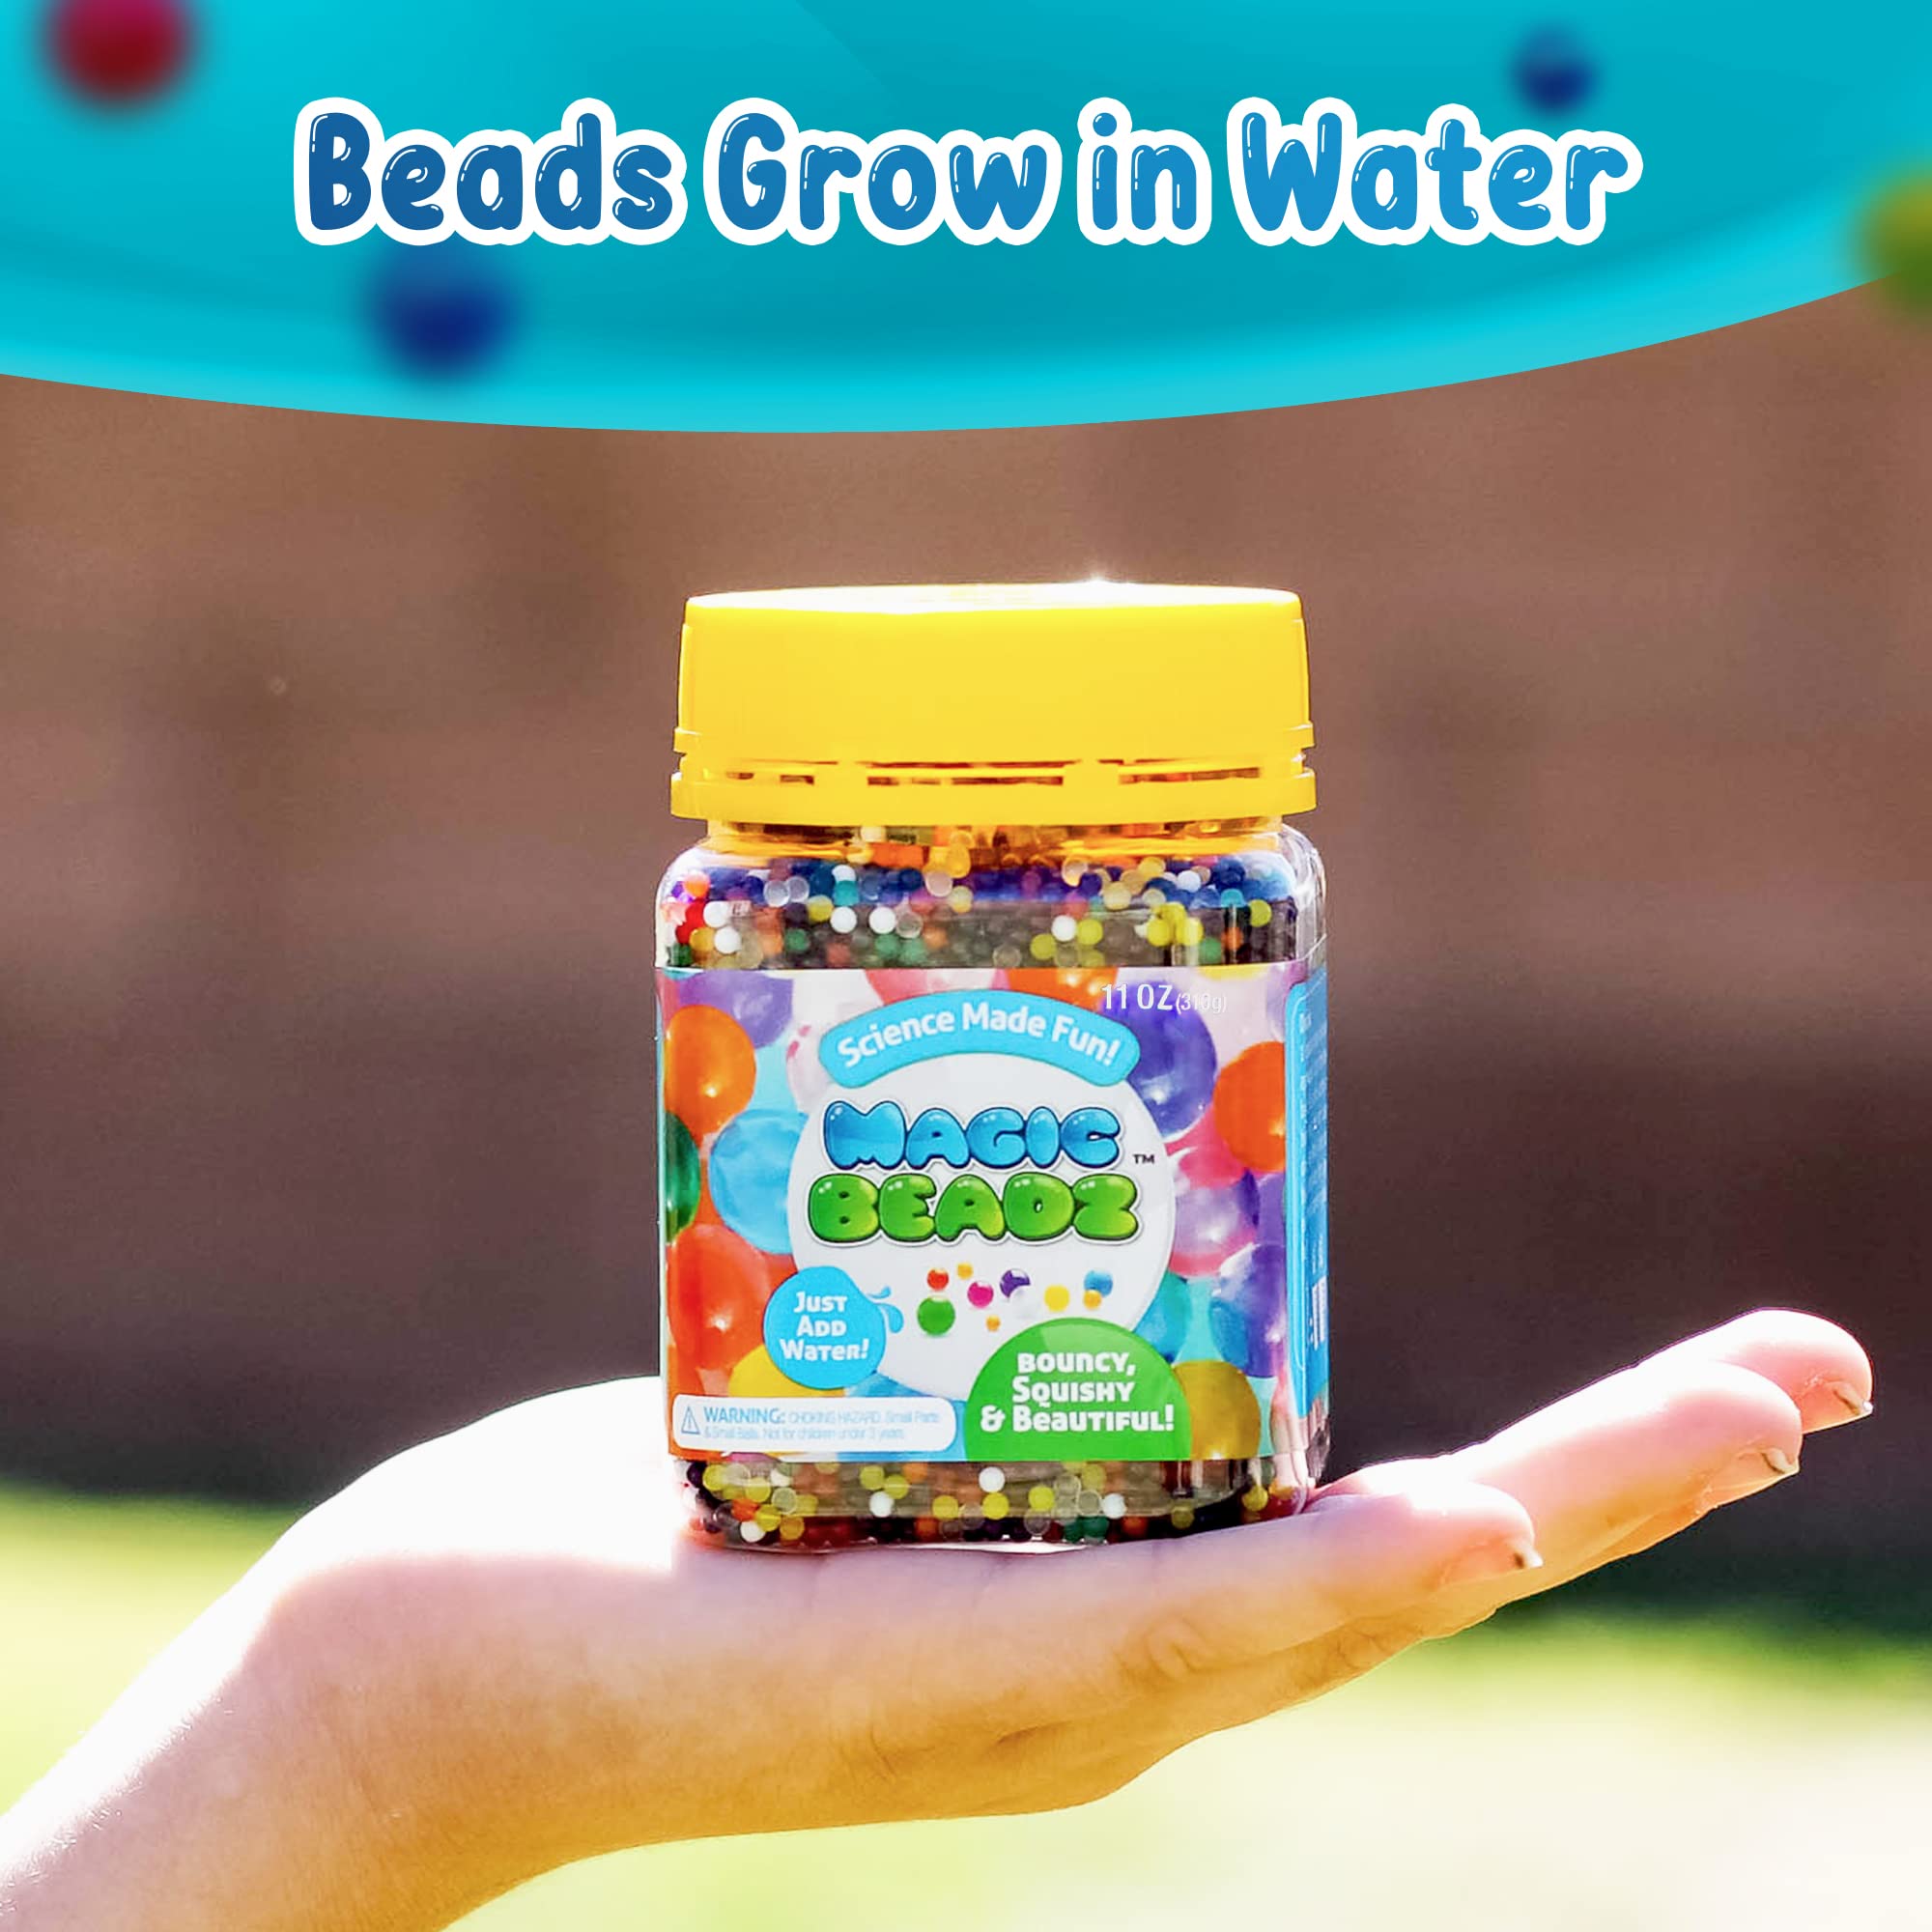 Colorful Non Toxic Water Beads (6.35 oz) - 20,000 Multi Color Water Beads in 12 Colors - Large Water Beads Grows Many Times Original Size - Water Beads for Plants or Vases - Sensory Play Fun (3+)